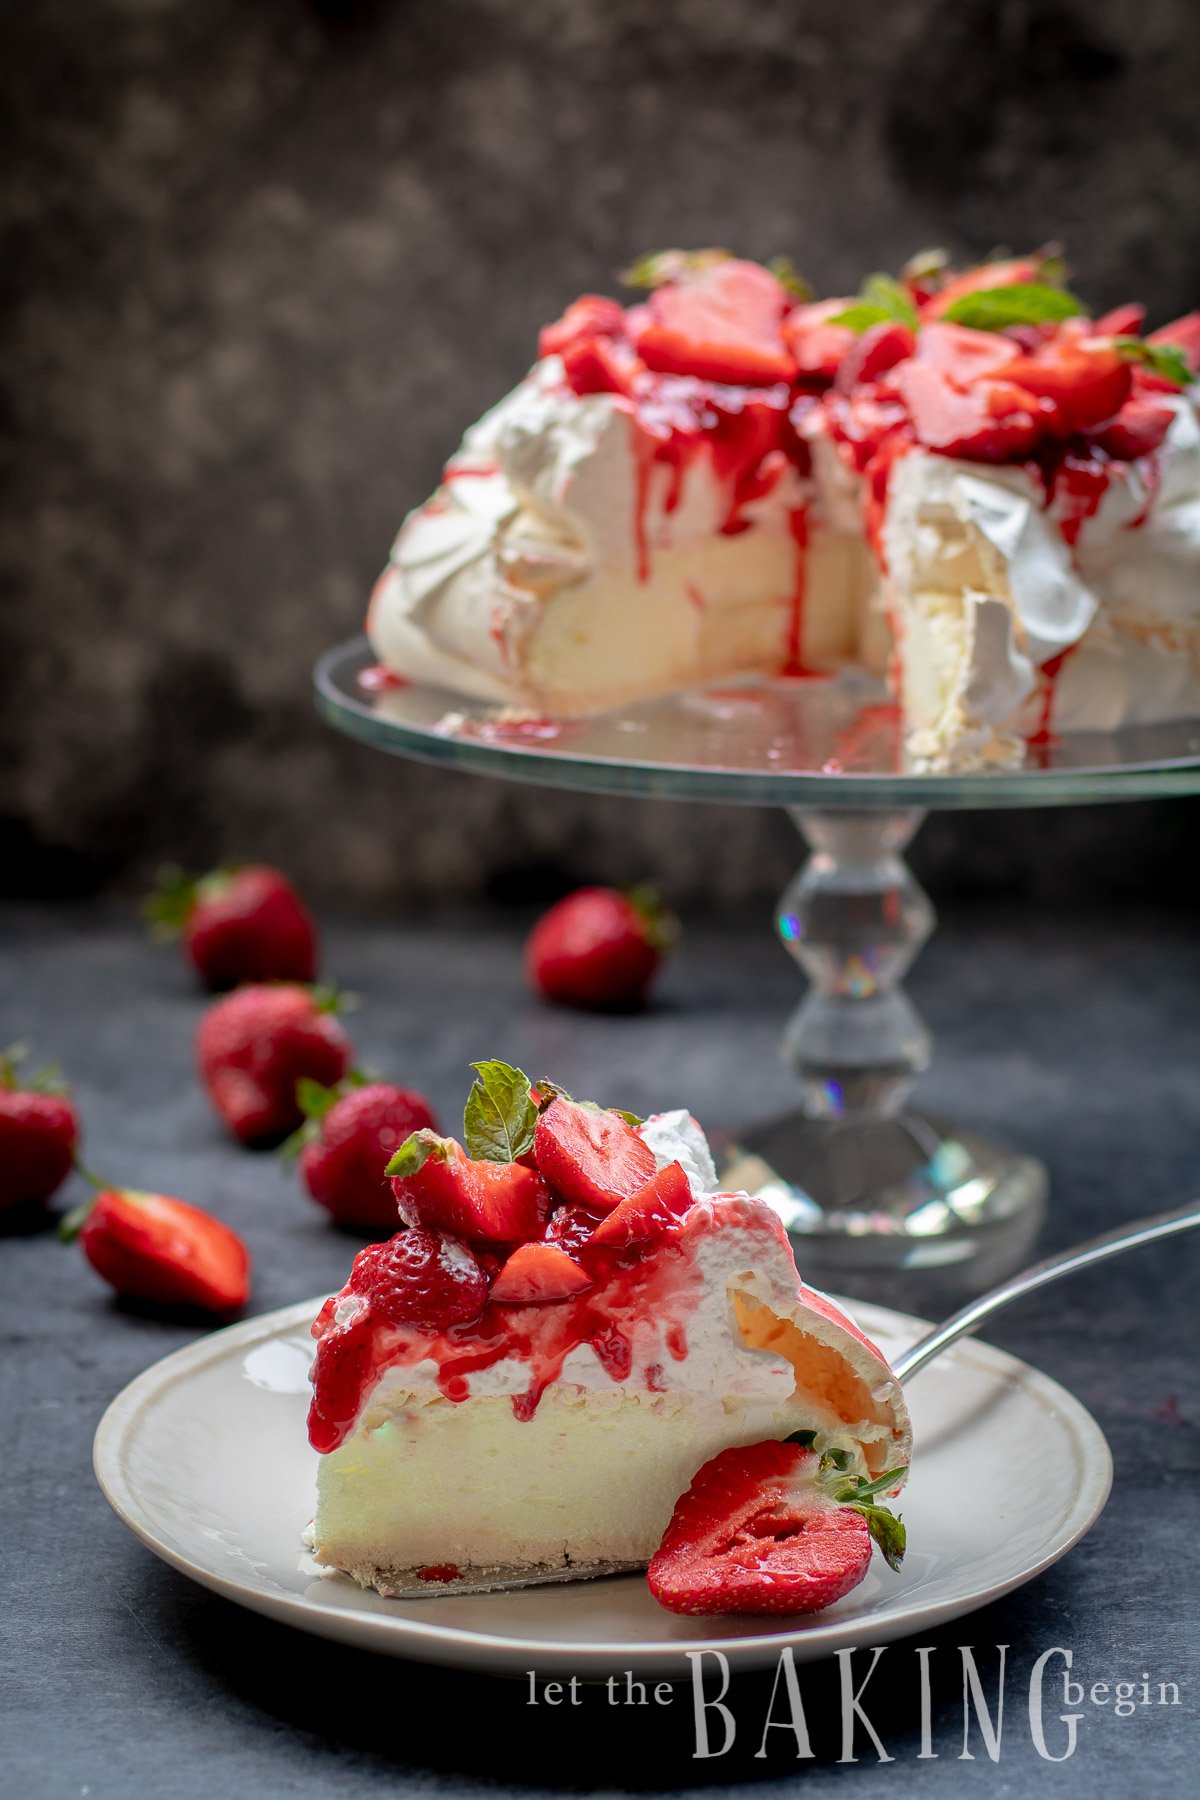 A slice of Pavlova on a plate, with the whole cake in the background.